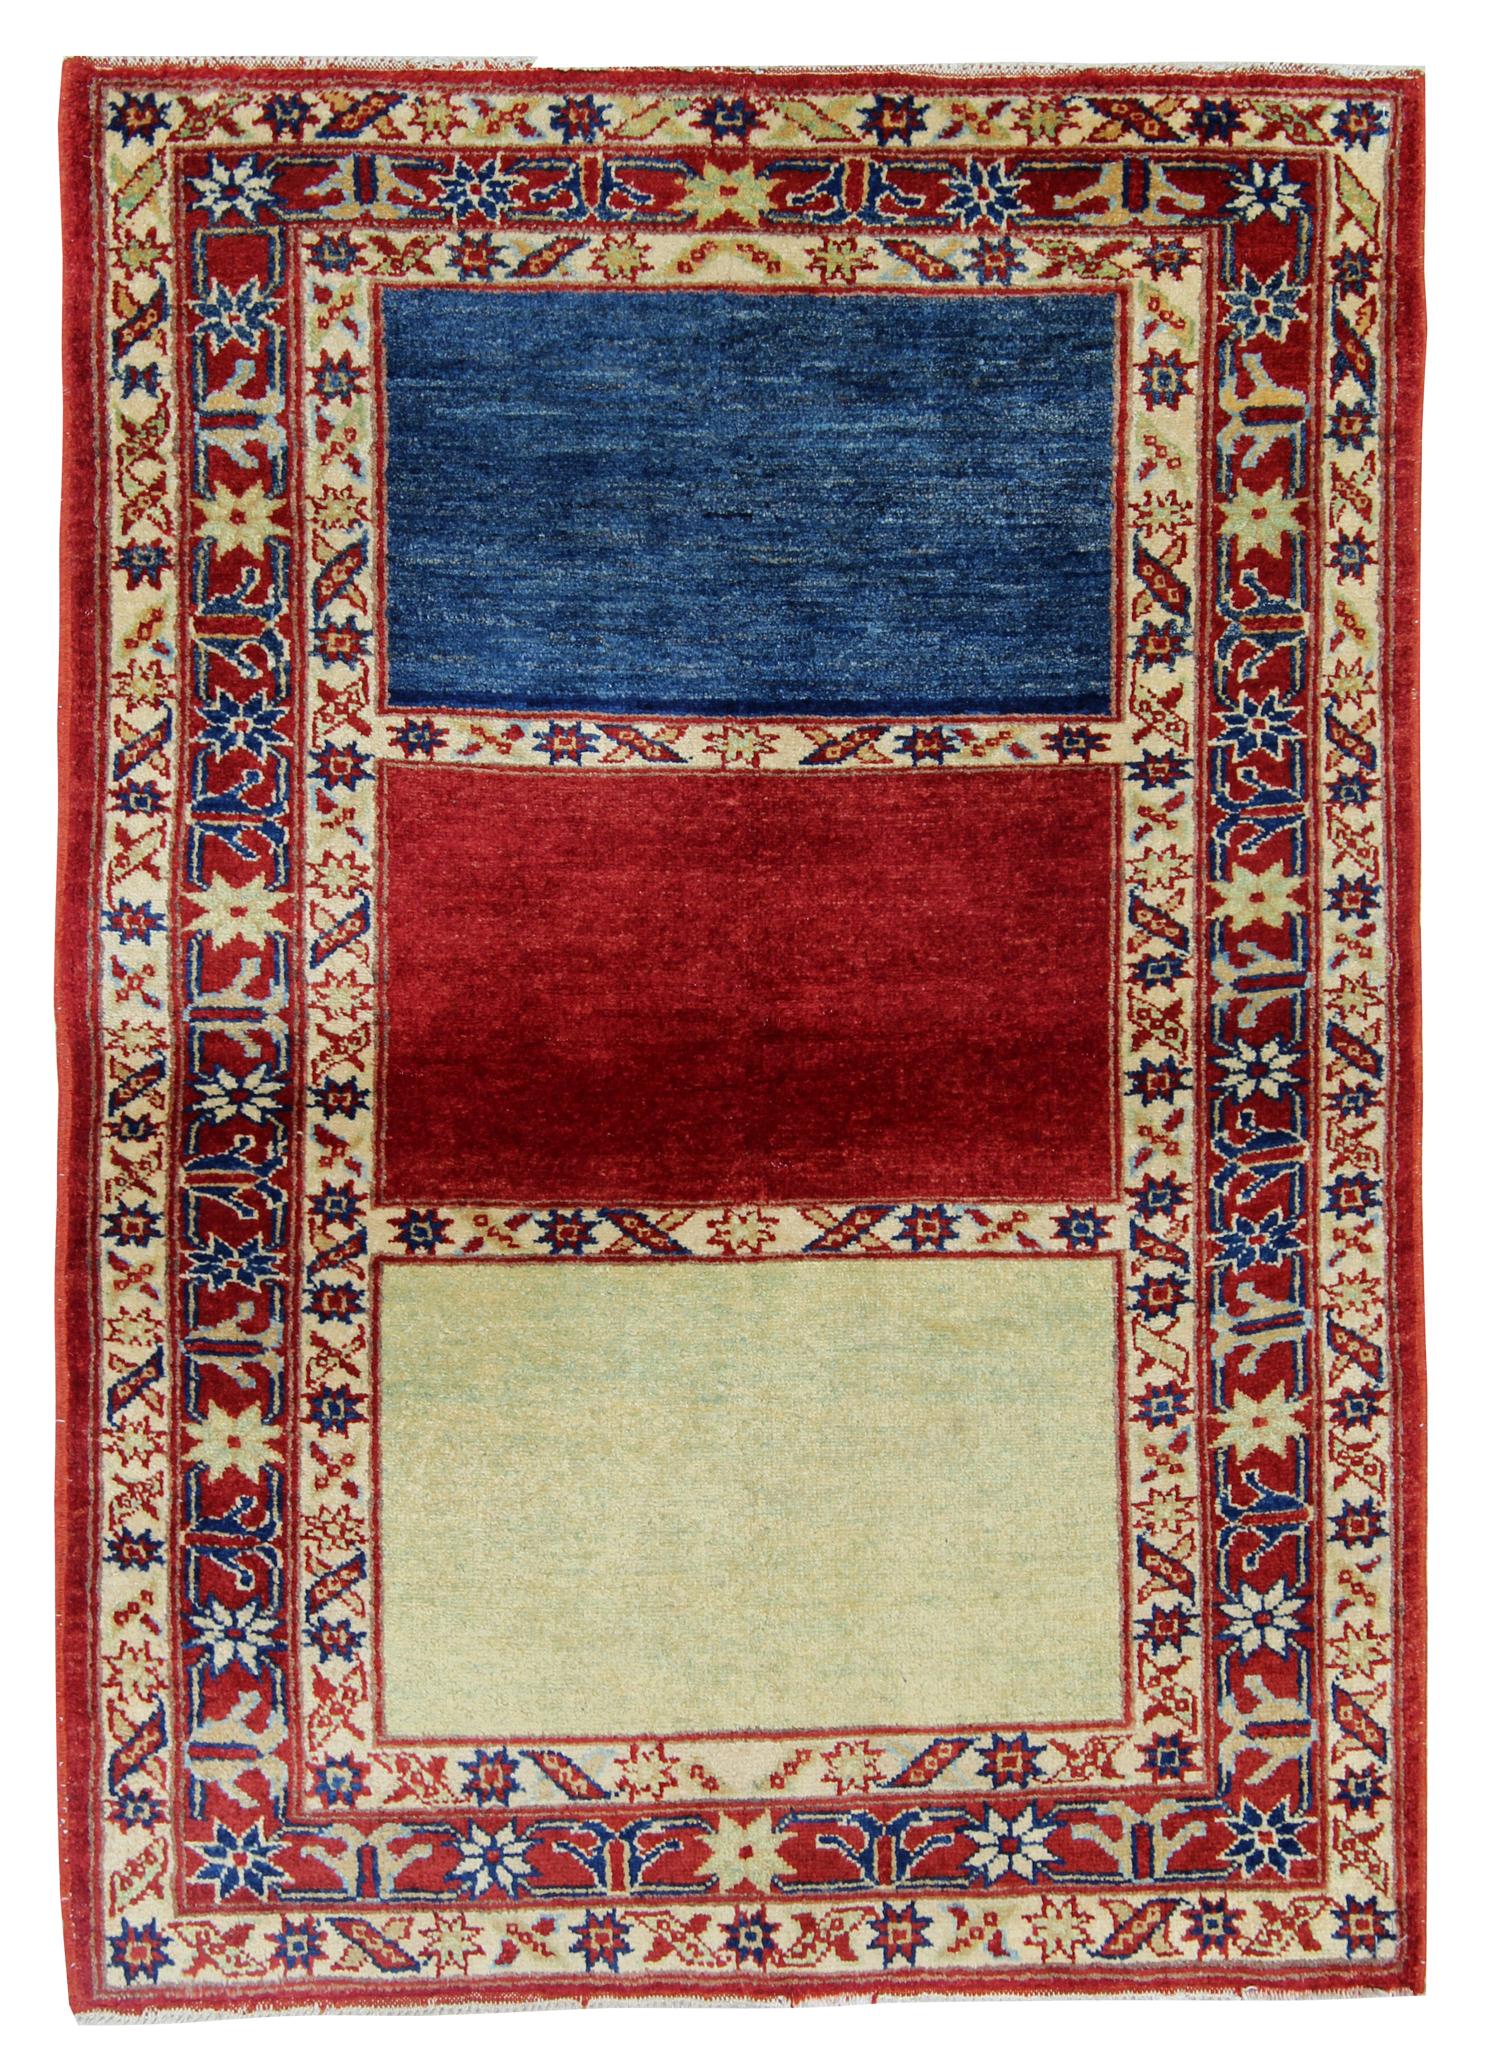 These handmade carpet new traditional rugs are handwoven rugs that come in a striking colour combination. This striped rug has red, blue, and yellow colours. The pattern on the border of the carpet rug has been influenced by Caucasian designs. These